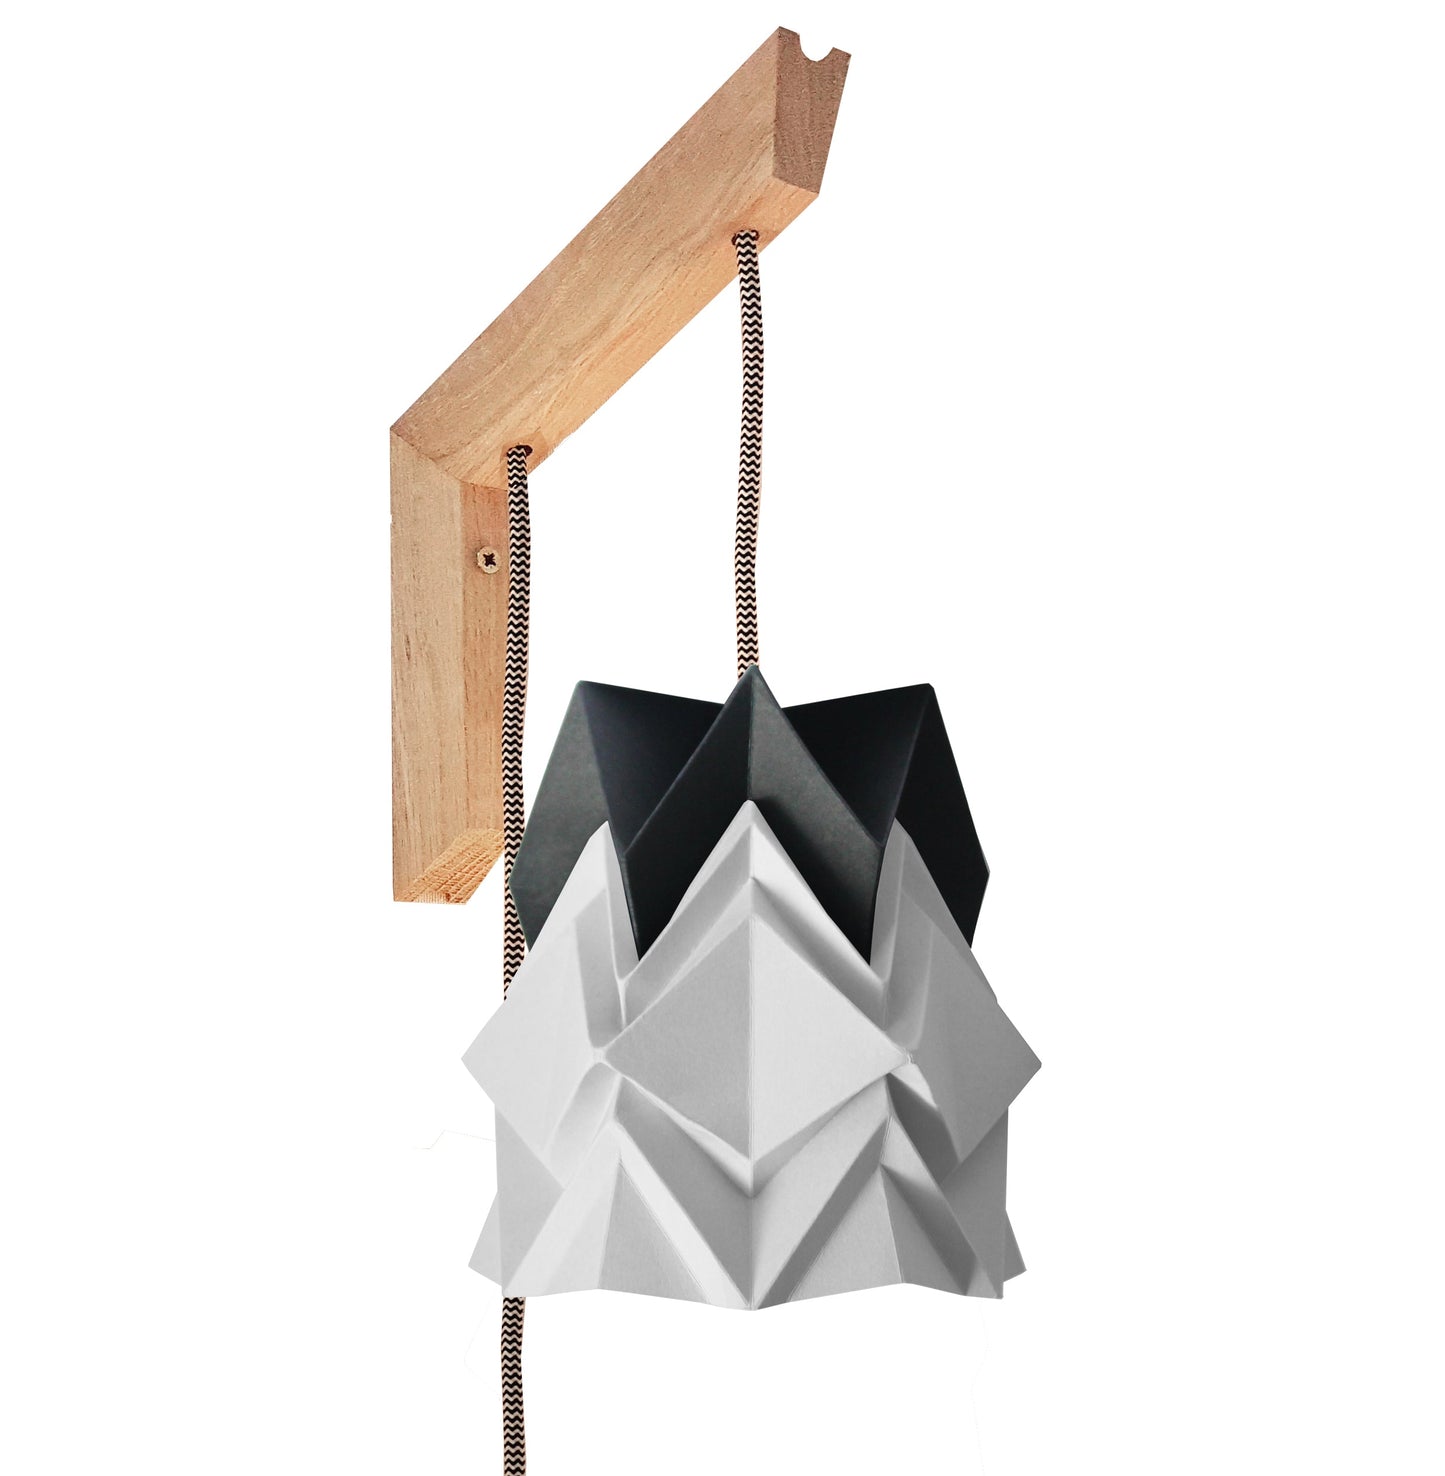 Origami Wall Lighting Fixture - Wooden Bracket With Small Bicolore Paper Pendant Light